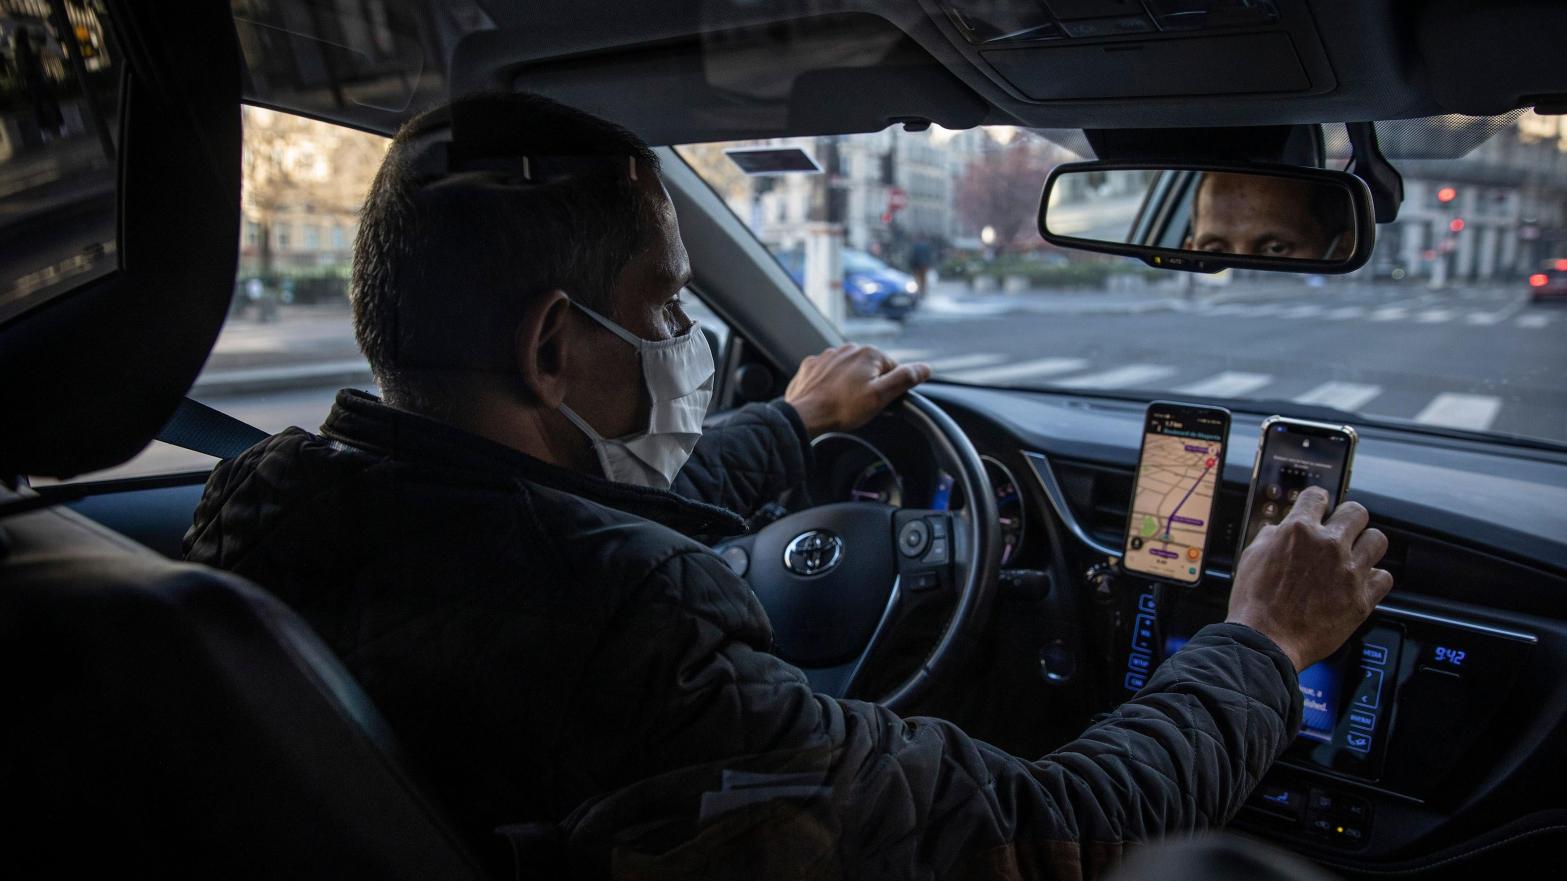 Uber typically charges 25% commission from drivers. (Image: Siegfried Mondola, Getty Images)